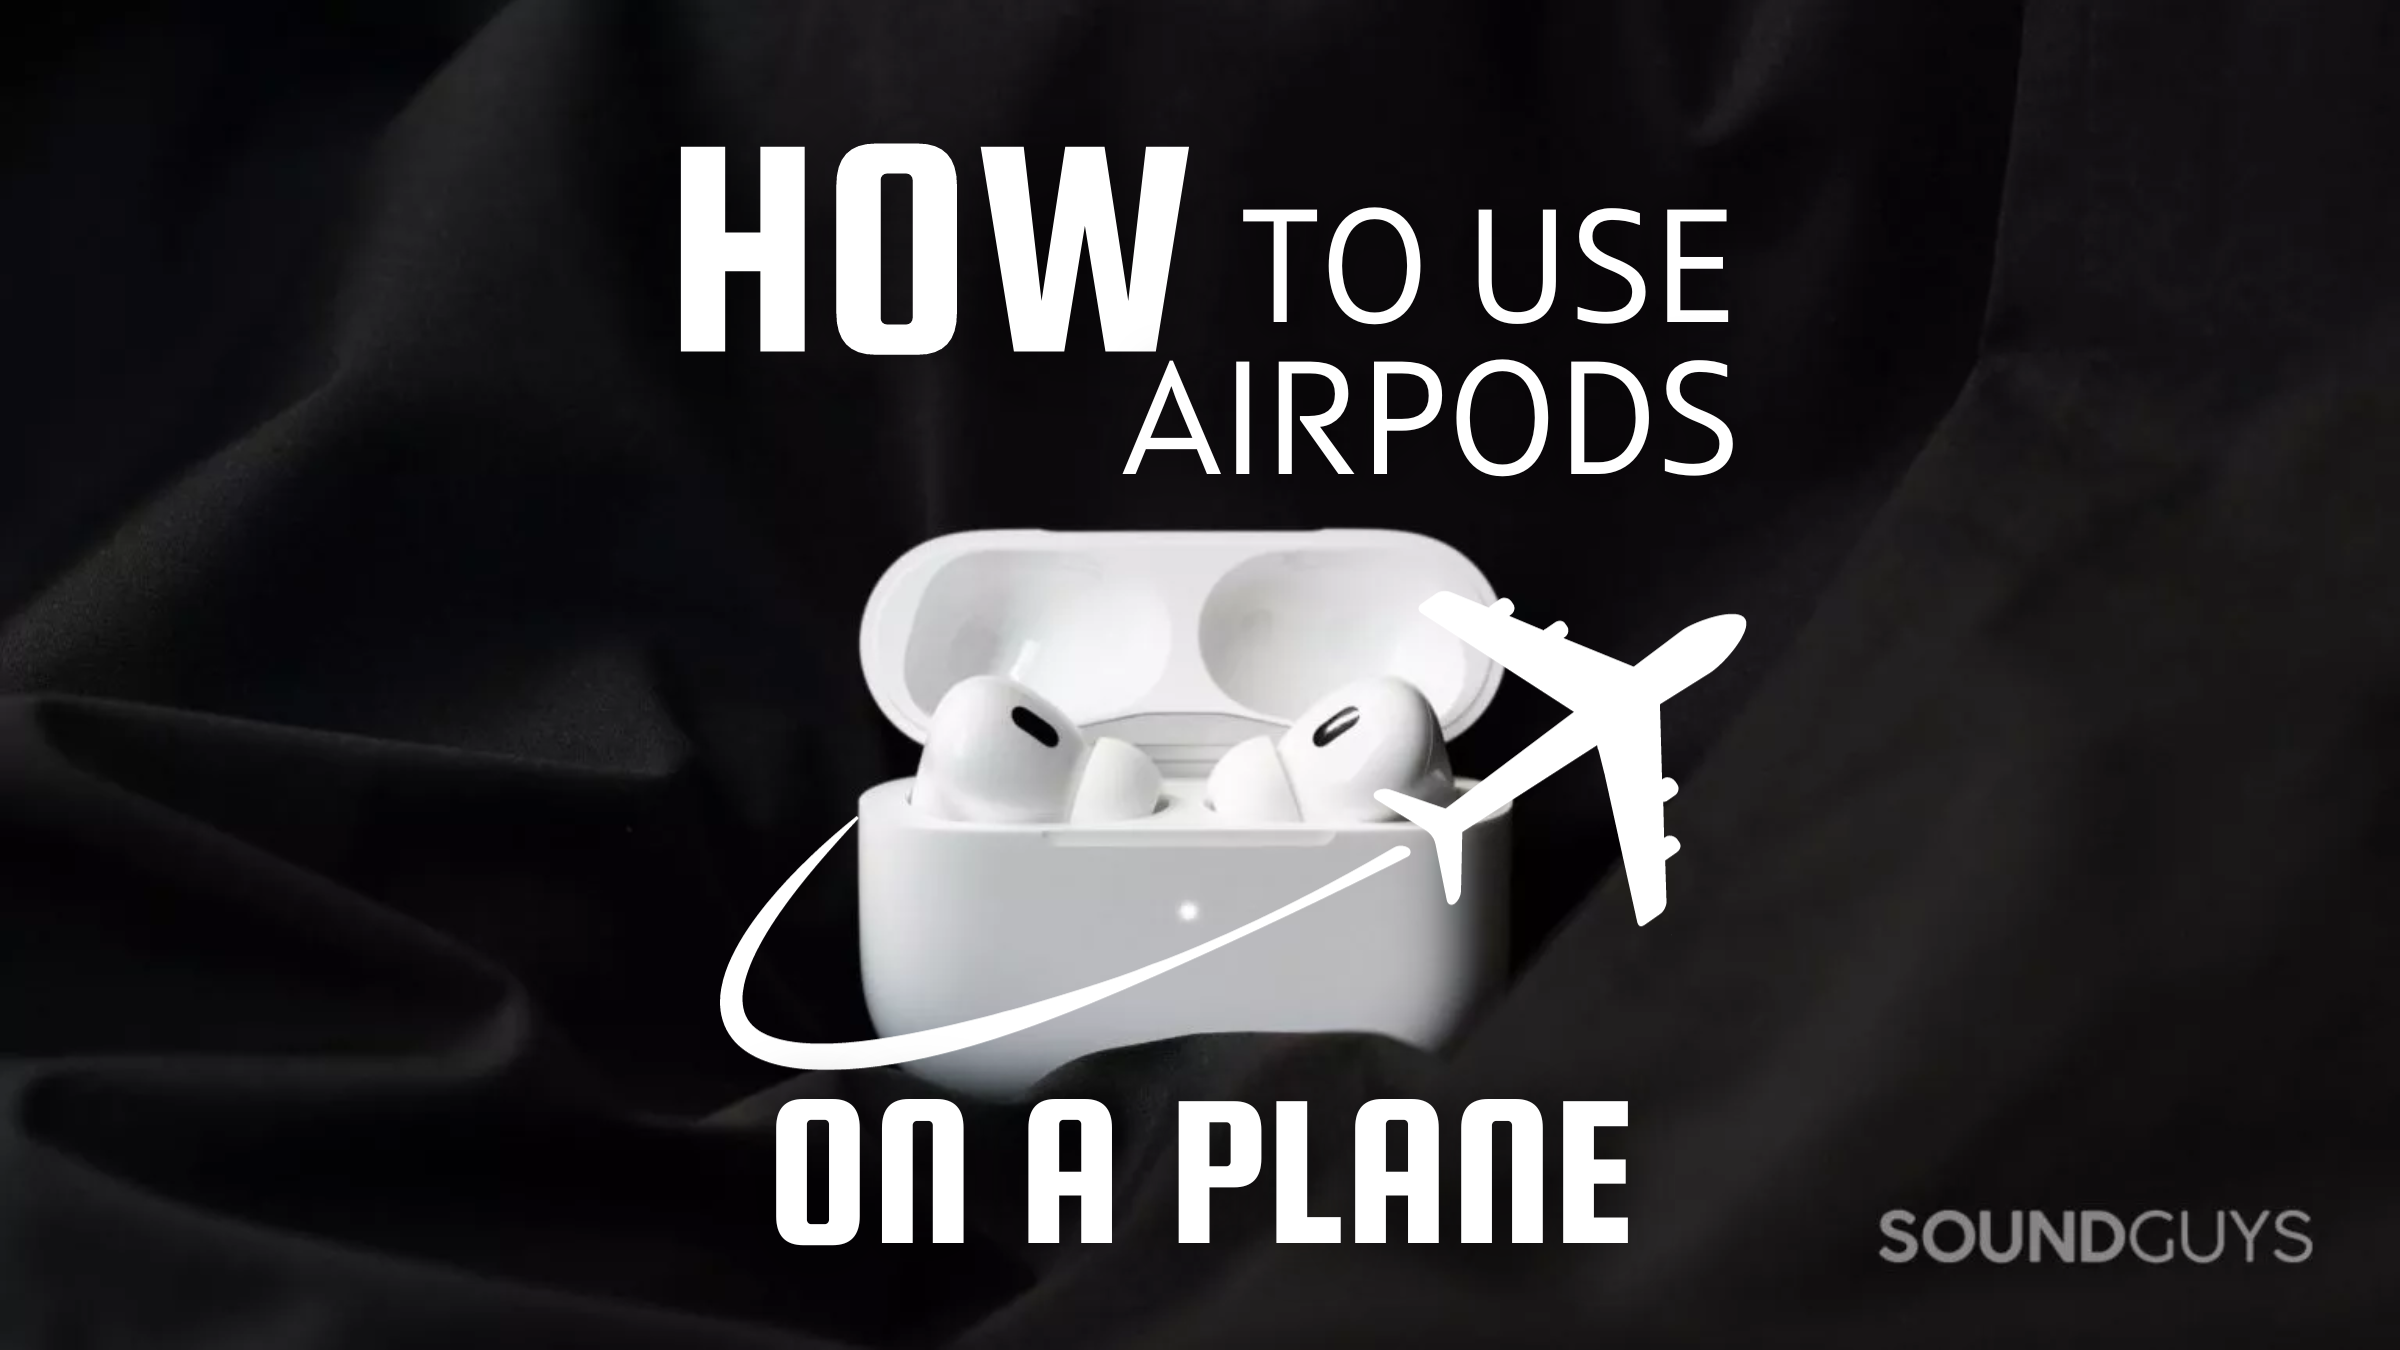 How to use AirPods on a plane